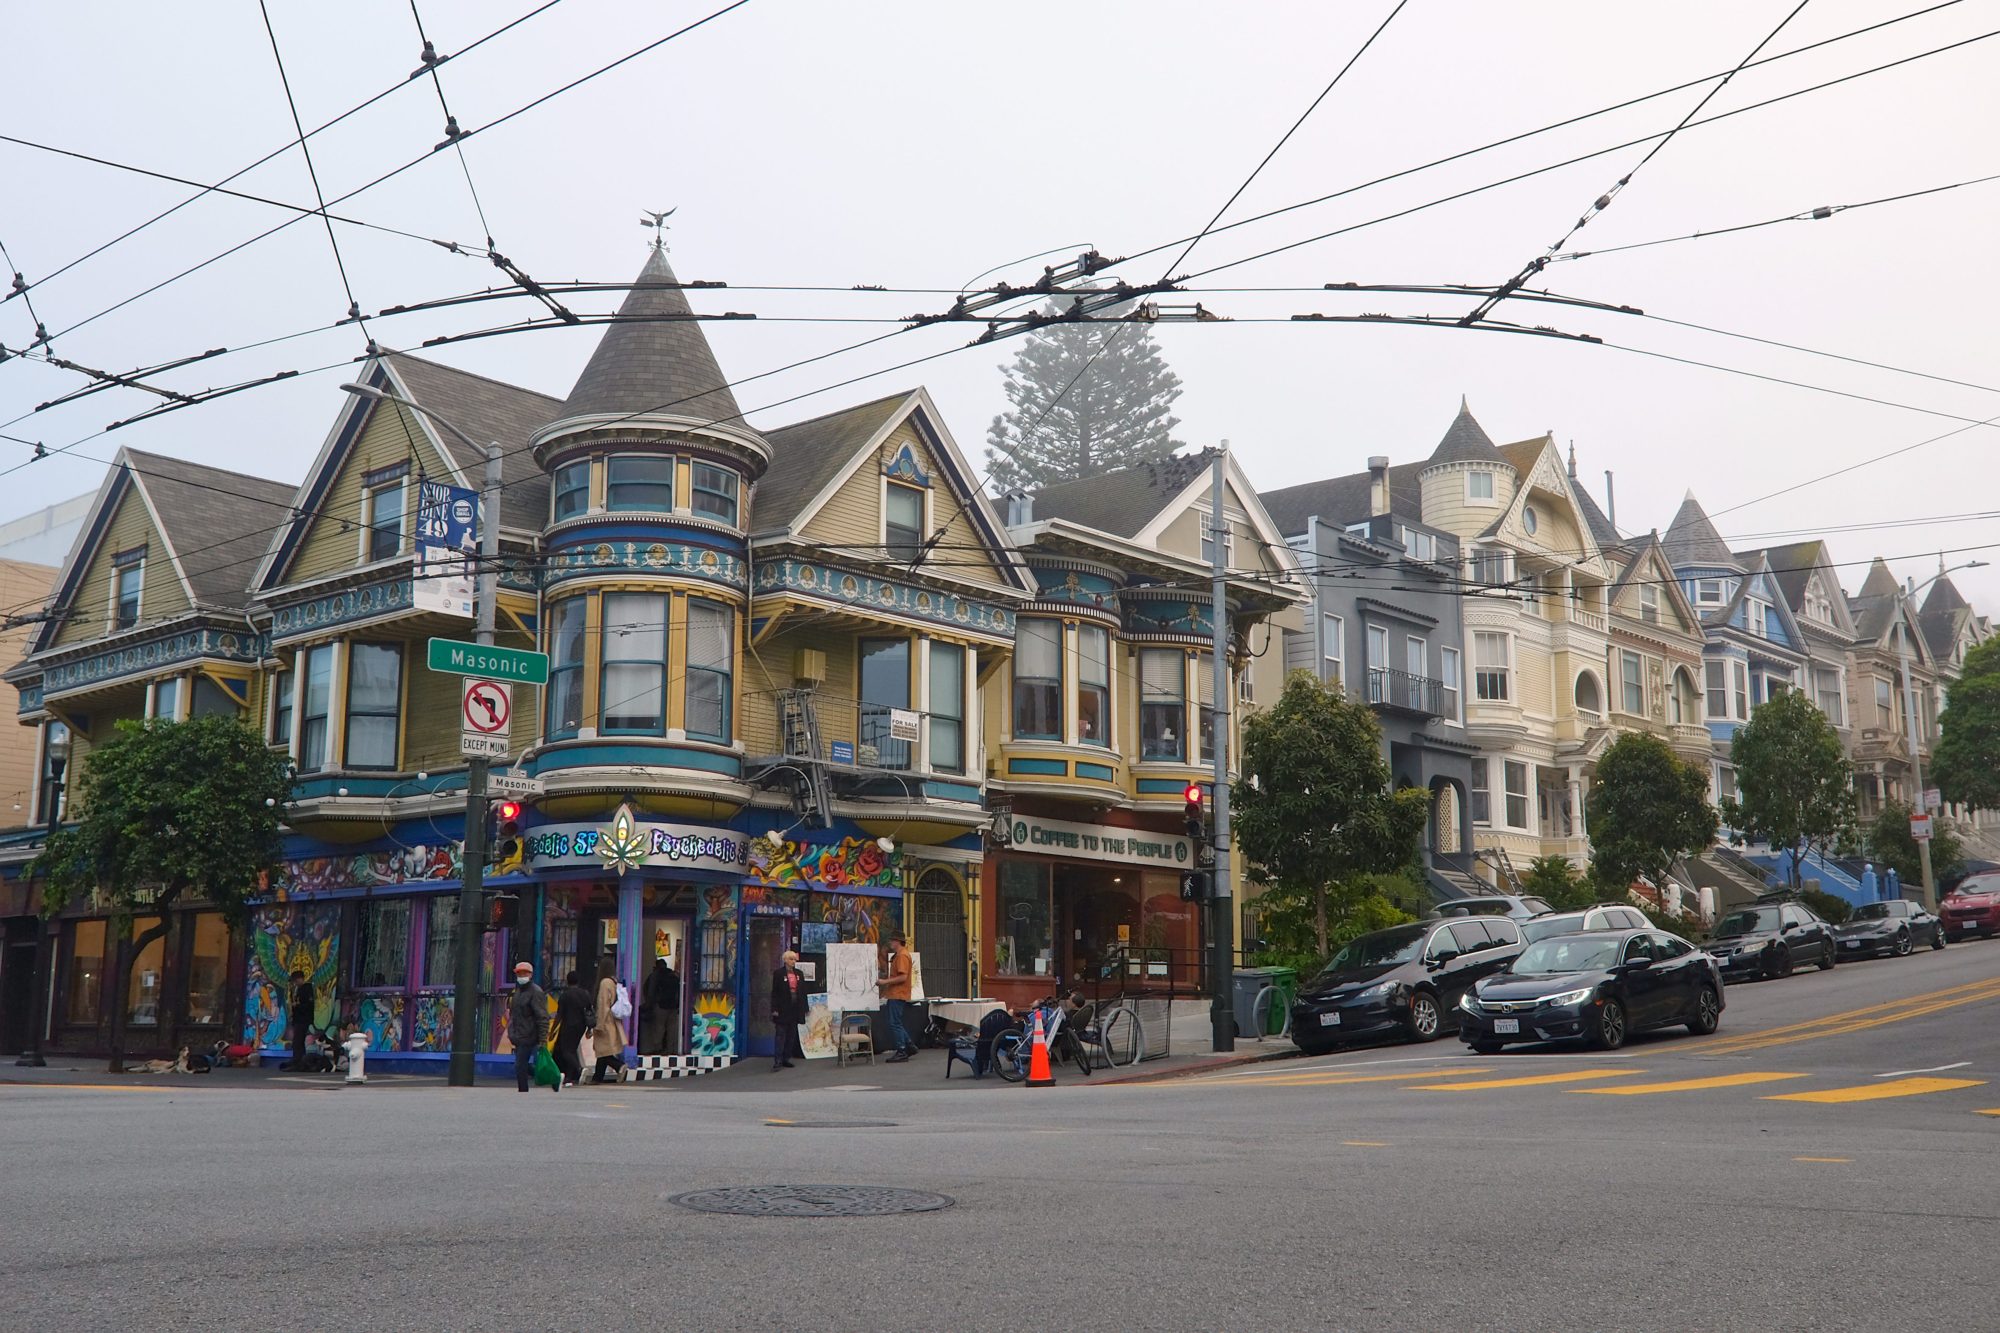 Bright buildings in Haight-Ashbury